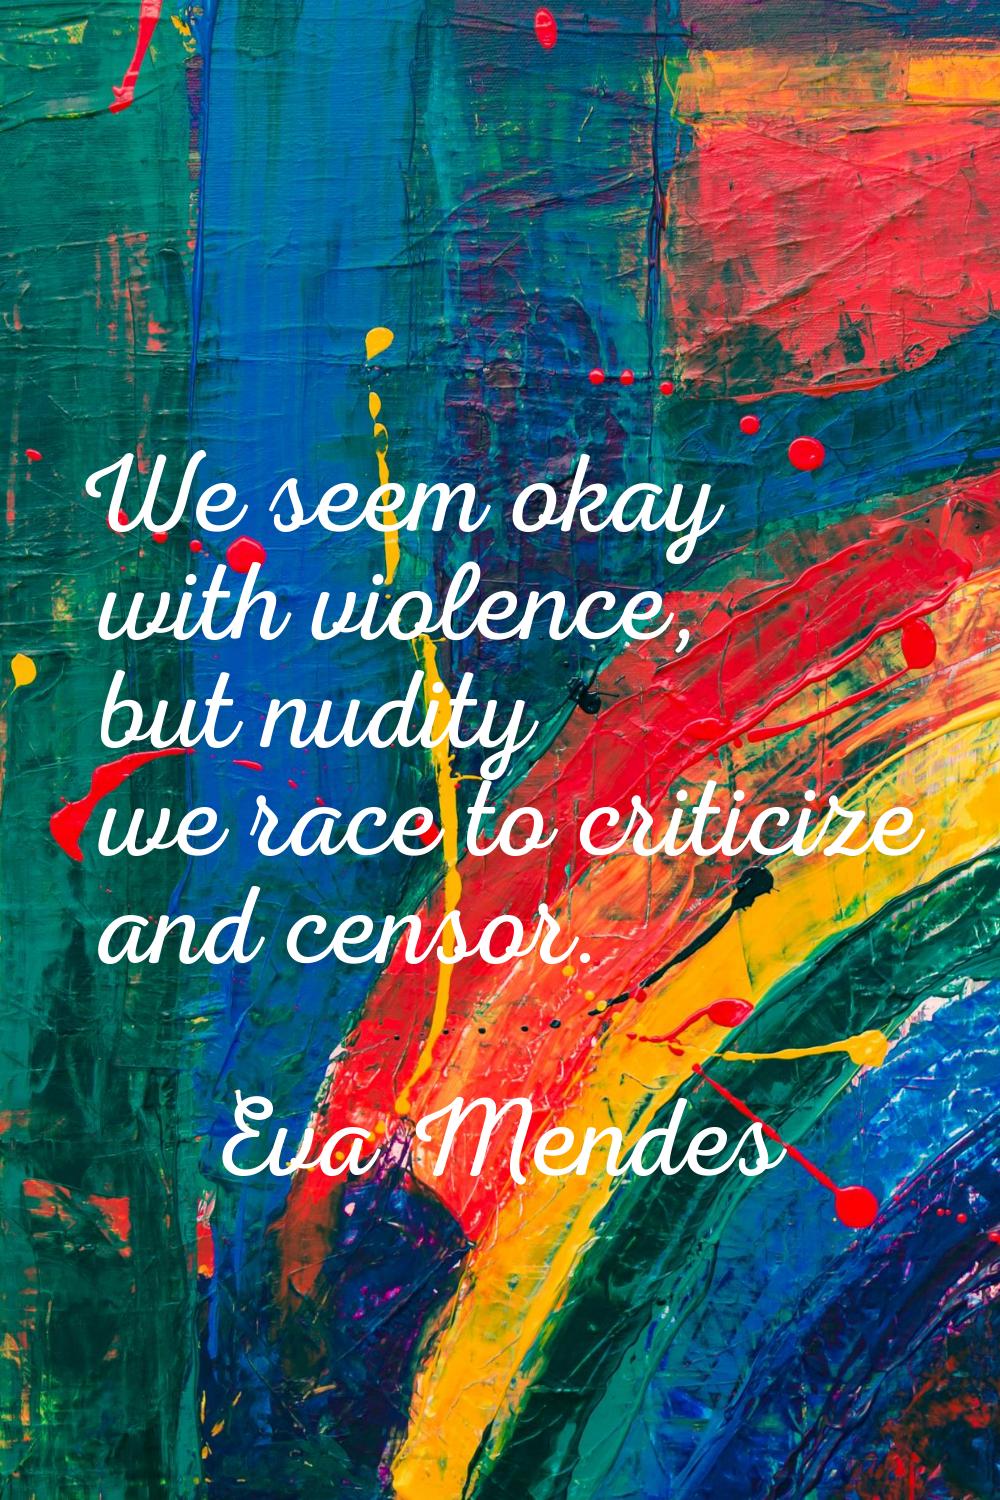 We seem okay with violence, but nudity we race to criticize and censor.